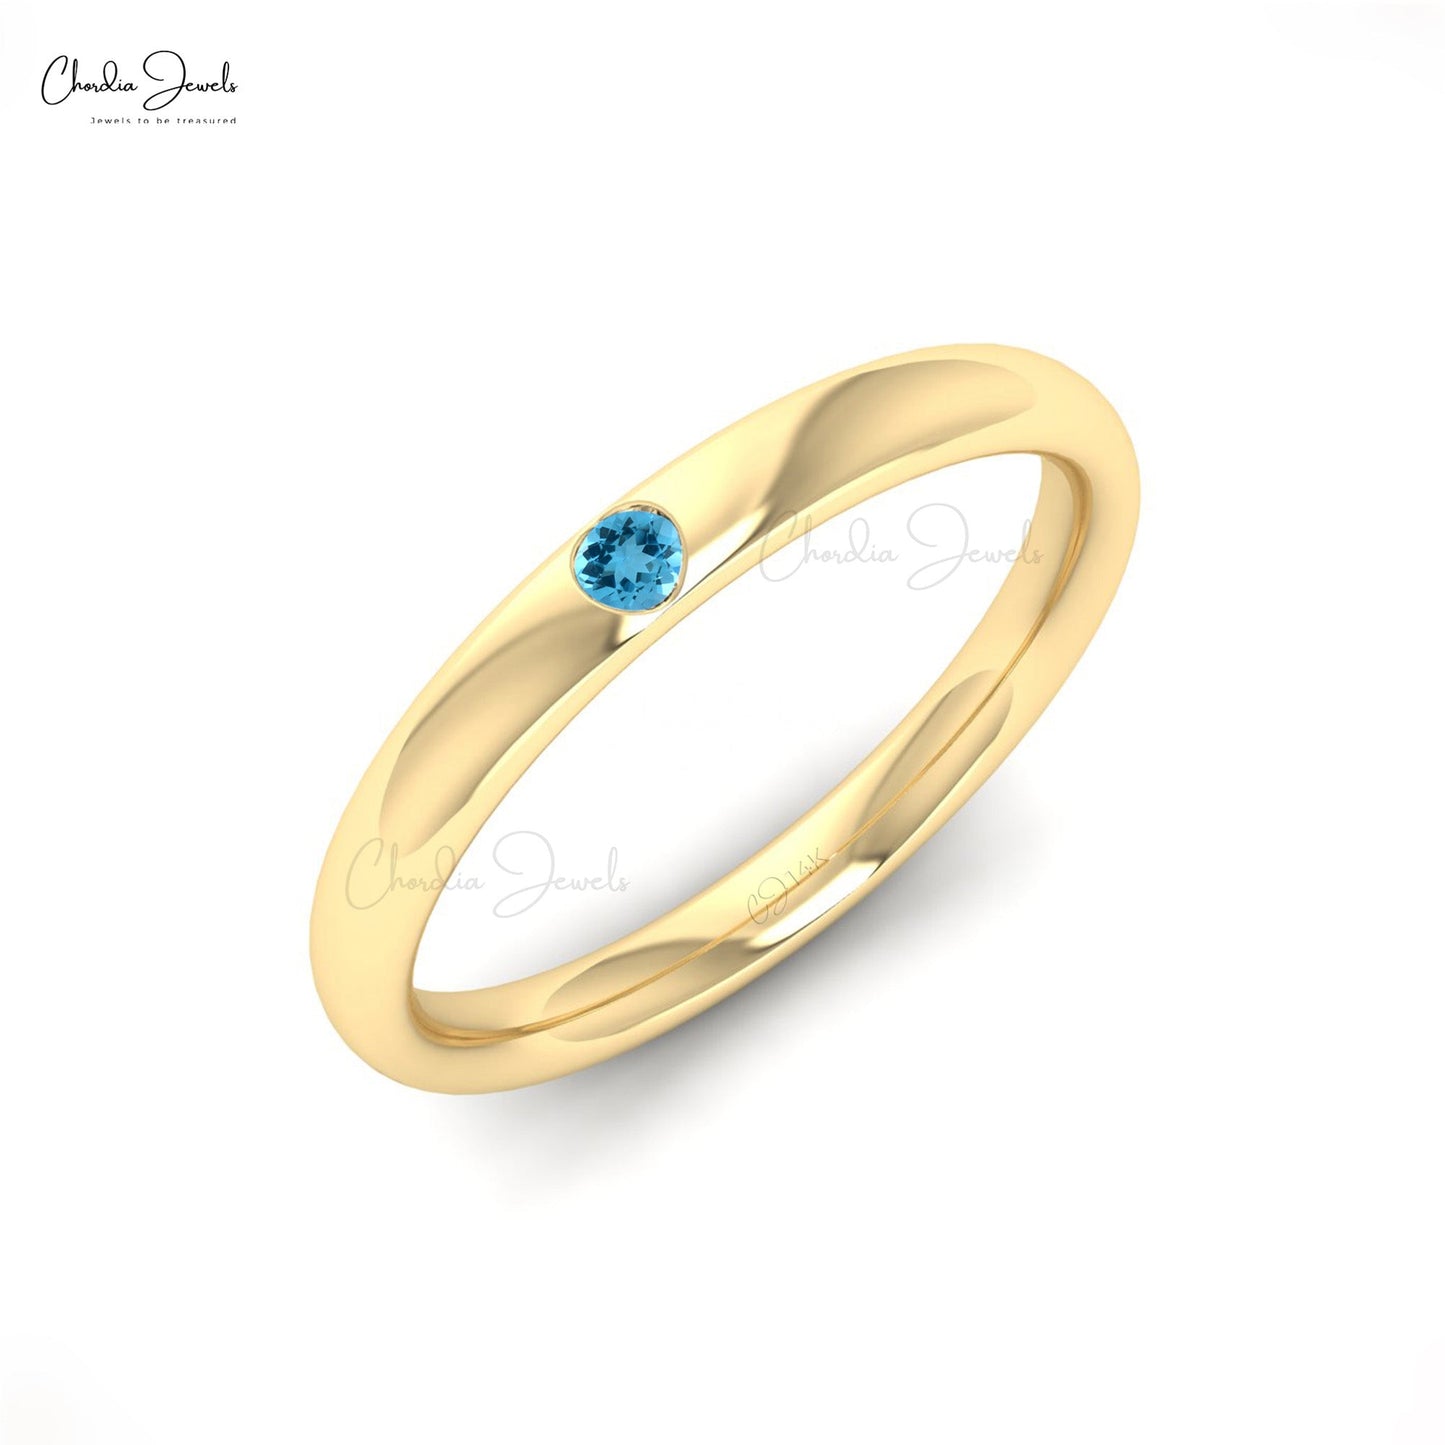 Load image into Gallery viewer, Classic Round Swiss Blue Topaz 14k Gold Solitaire Ring
